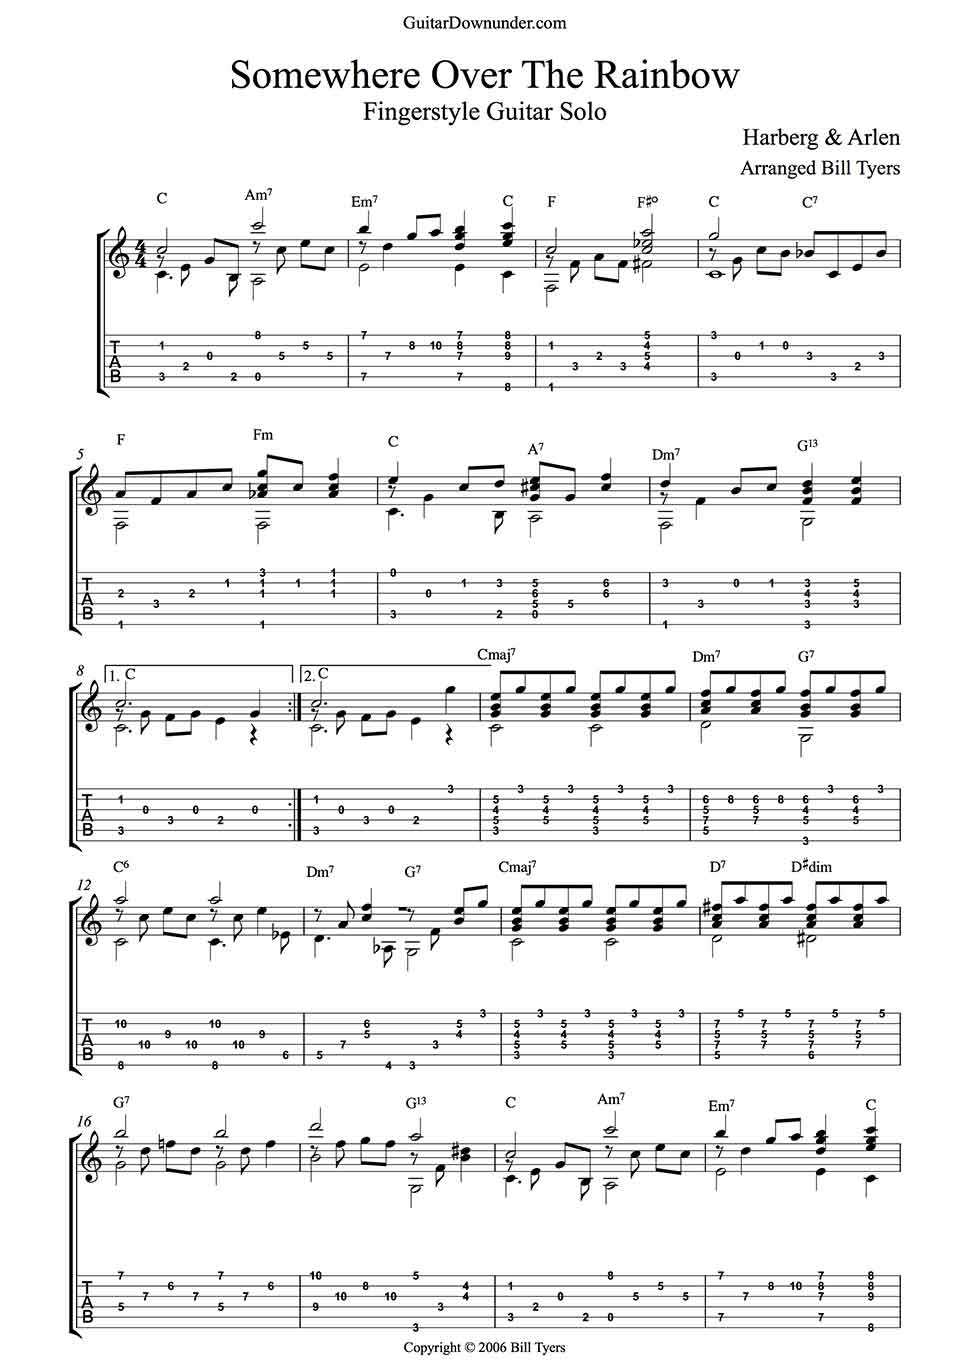 Somewhere Over The Rainbow Chords Somewhere Over The Rainbow Guitar Music Fingerstyle Arrangement